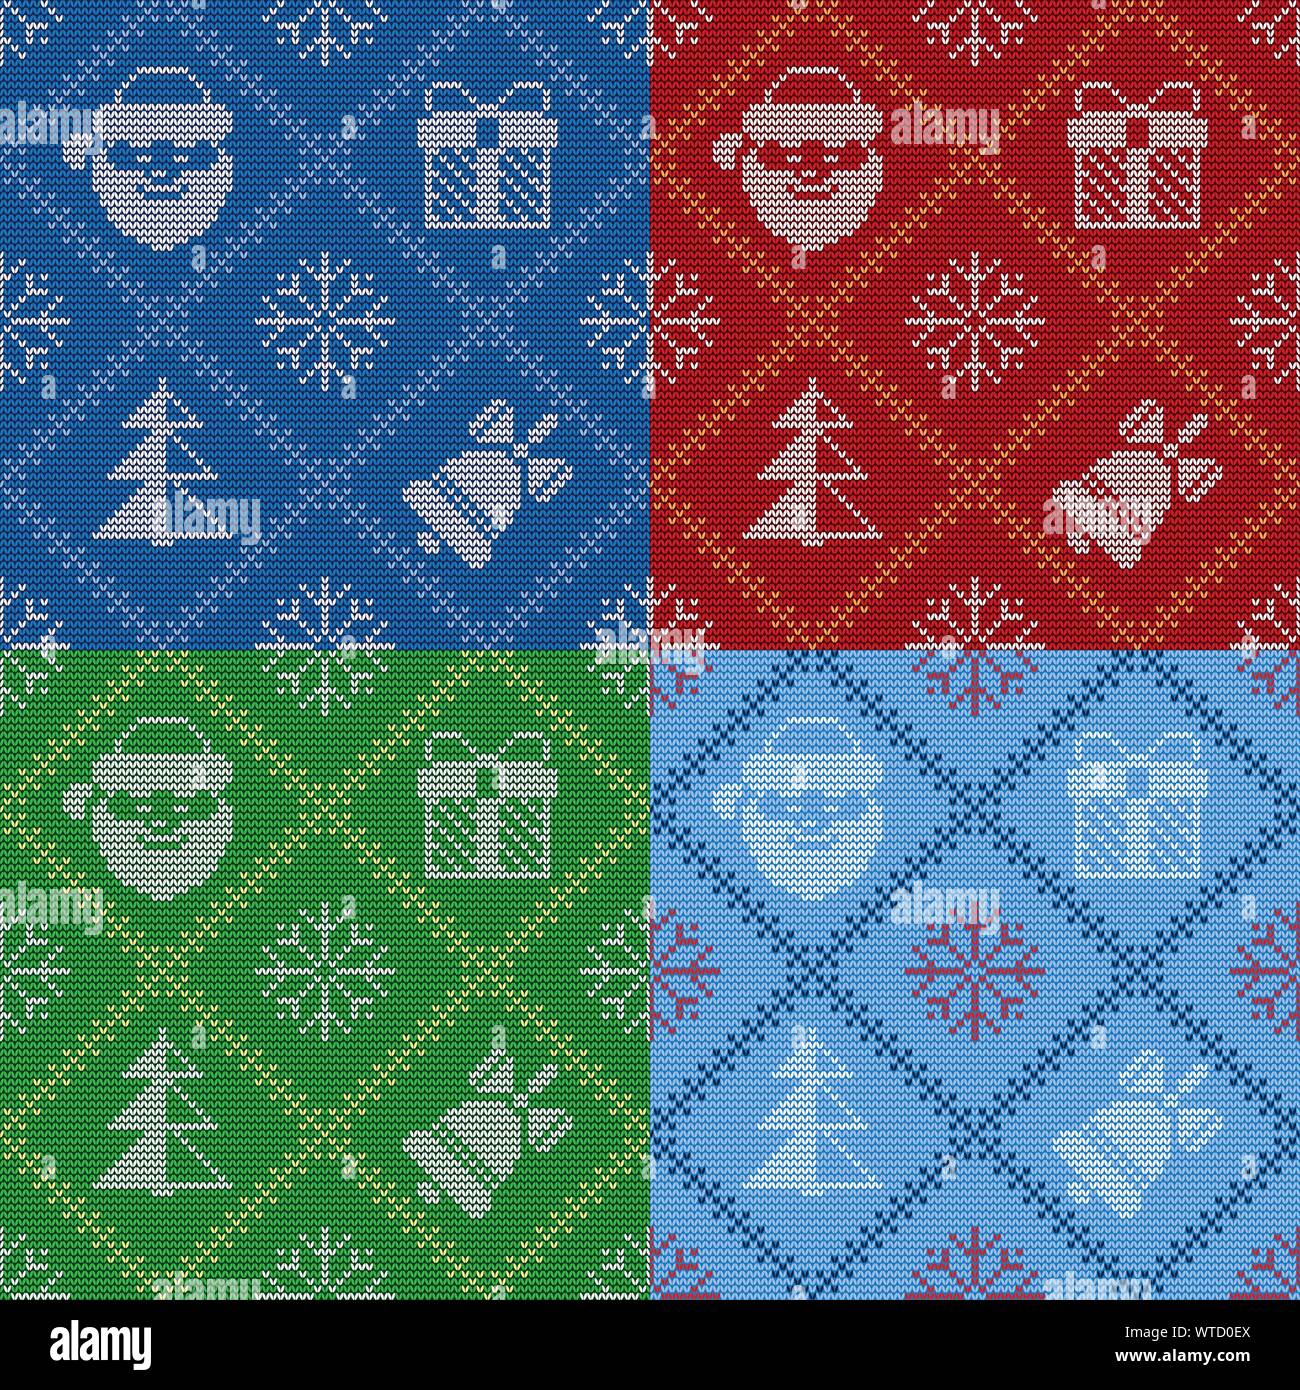 Set of Christmas knitted seamless patterns. Good for wrapping. All elements are on separate layers. Easy to edit color of all elements. Stock Vector